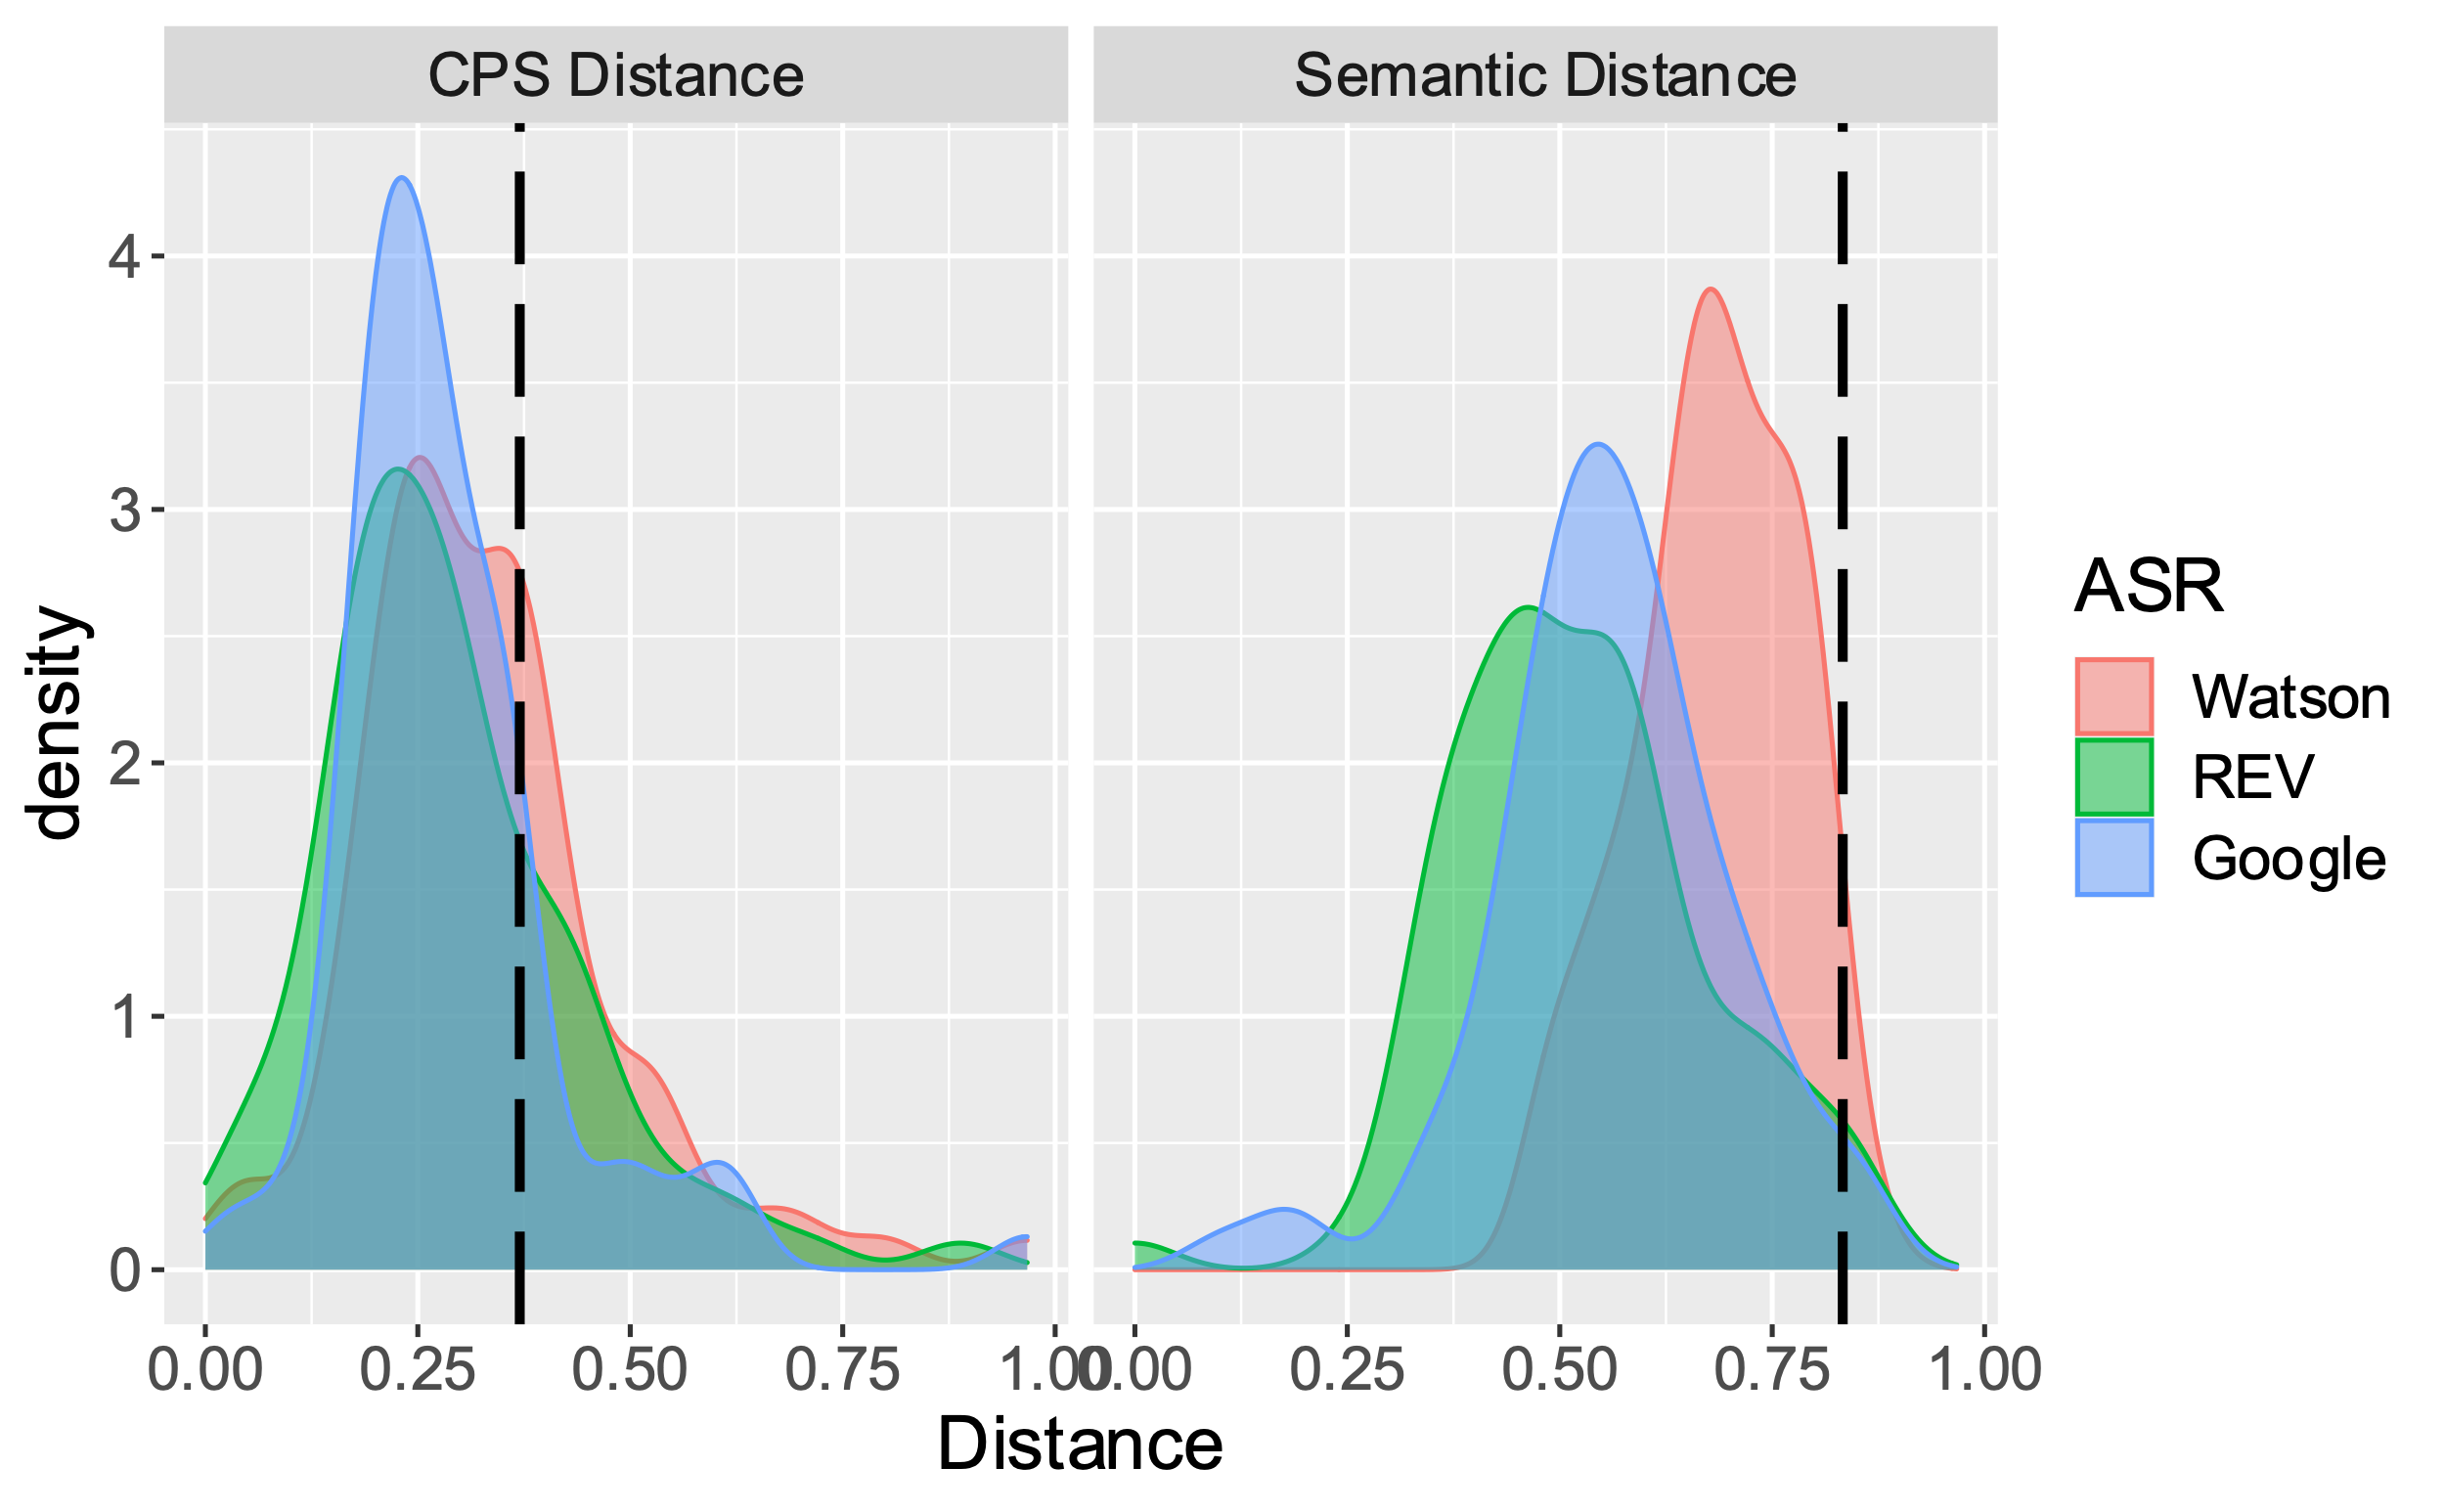 Density plots of CPS Distance and Semantic Distance by ASR. Dashed line shows the random baseline for shuffled utterances.